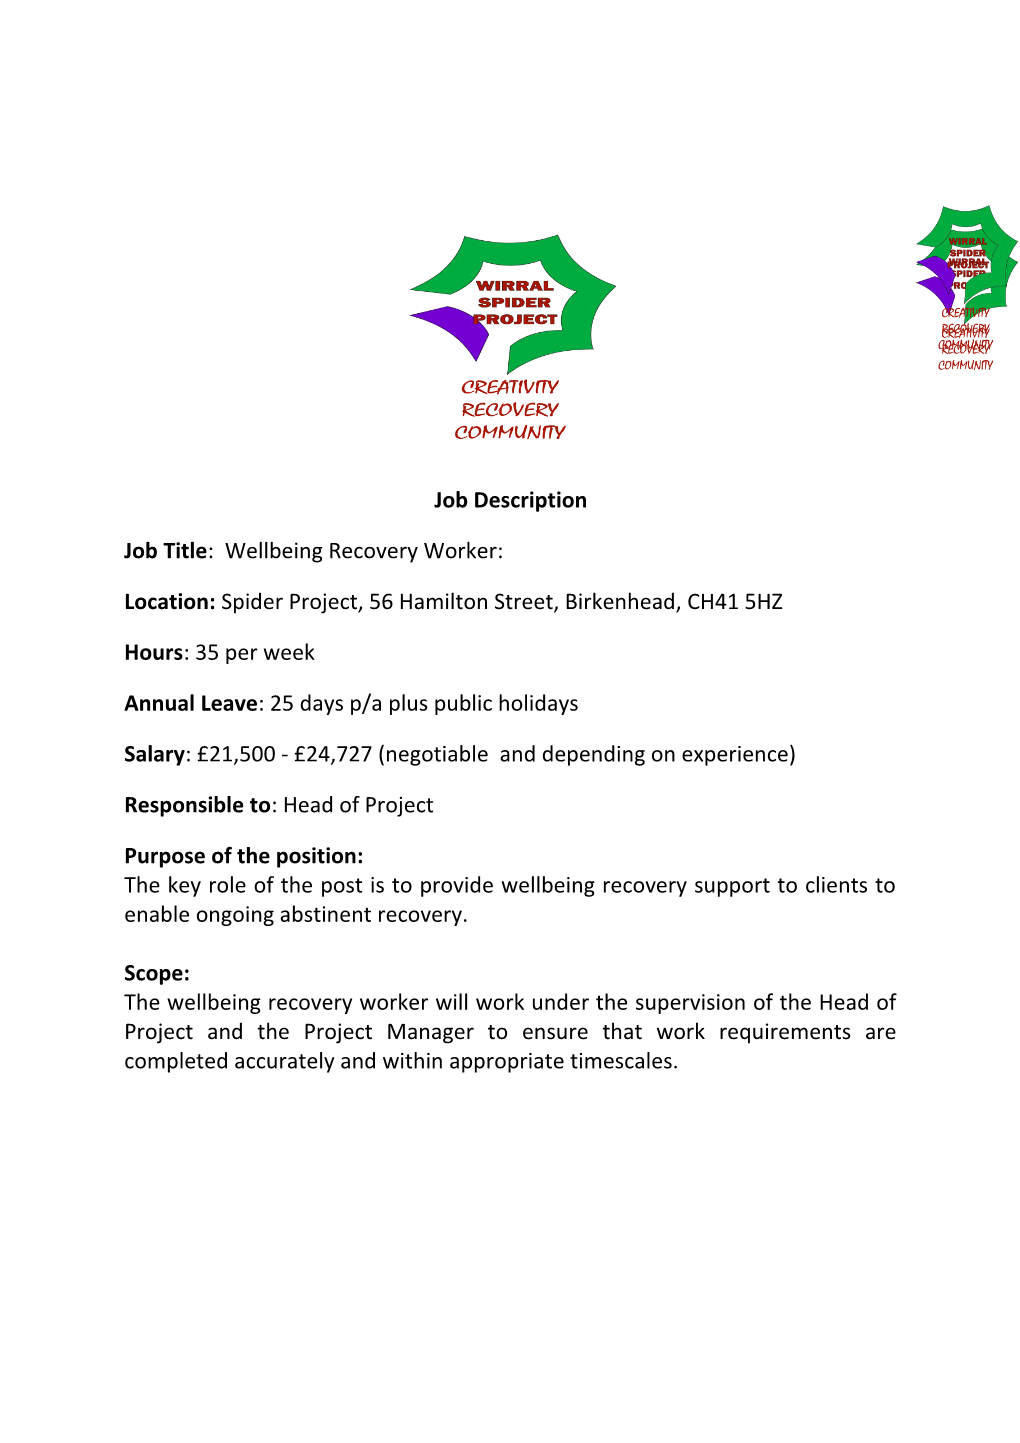 Job Title: Wellbeing Recovery Worker